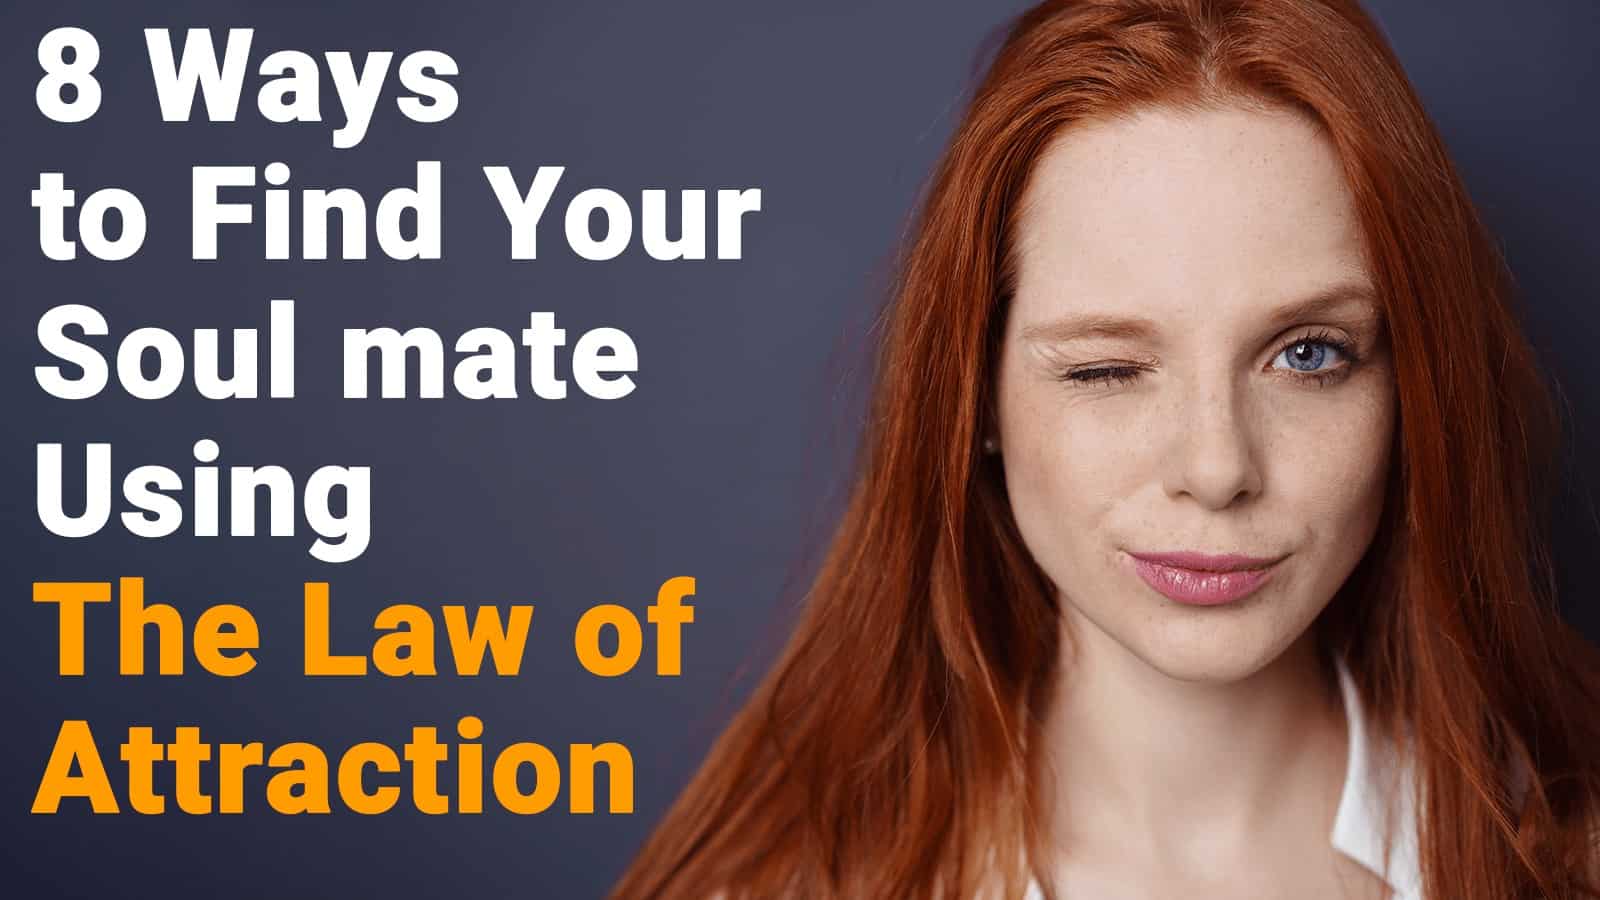 8 Ways to Find Your Soul mate Using The Law of Attraction